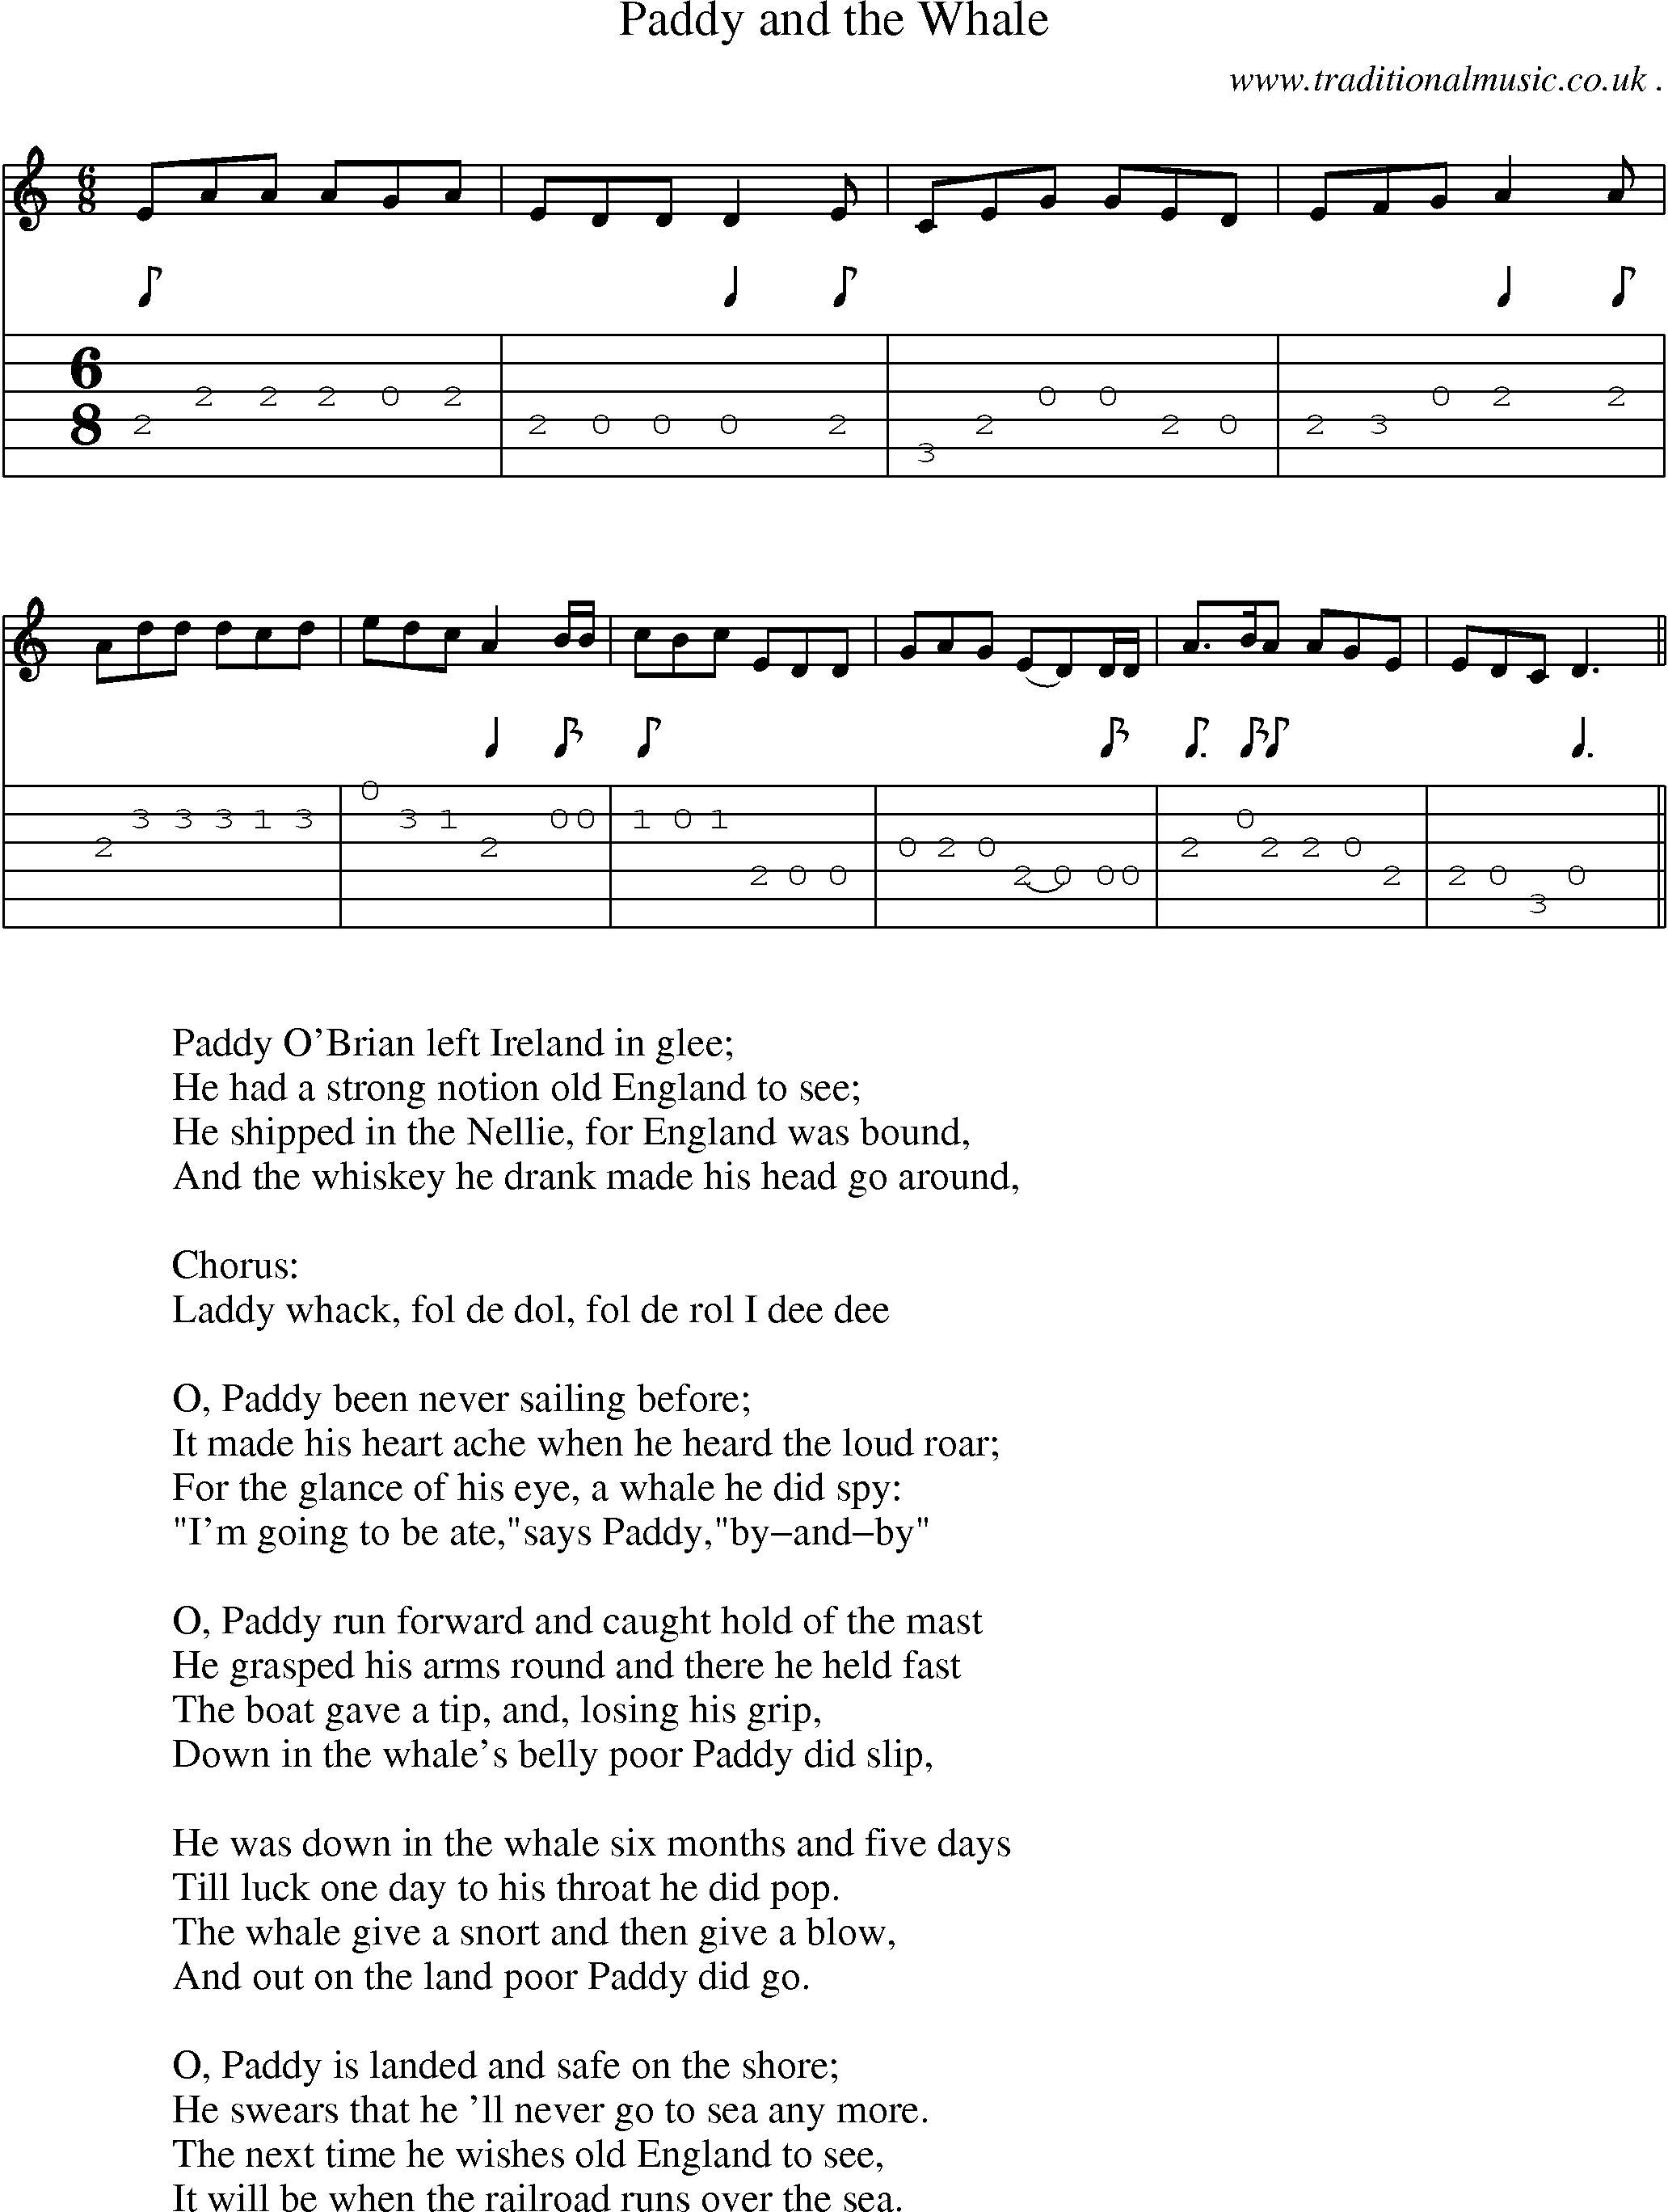 Sheet-Music and Guitar Tabs for Paddy And The Whale